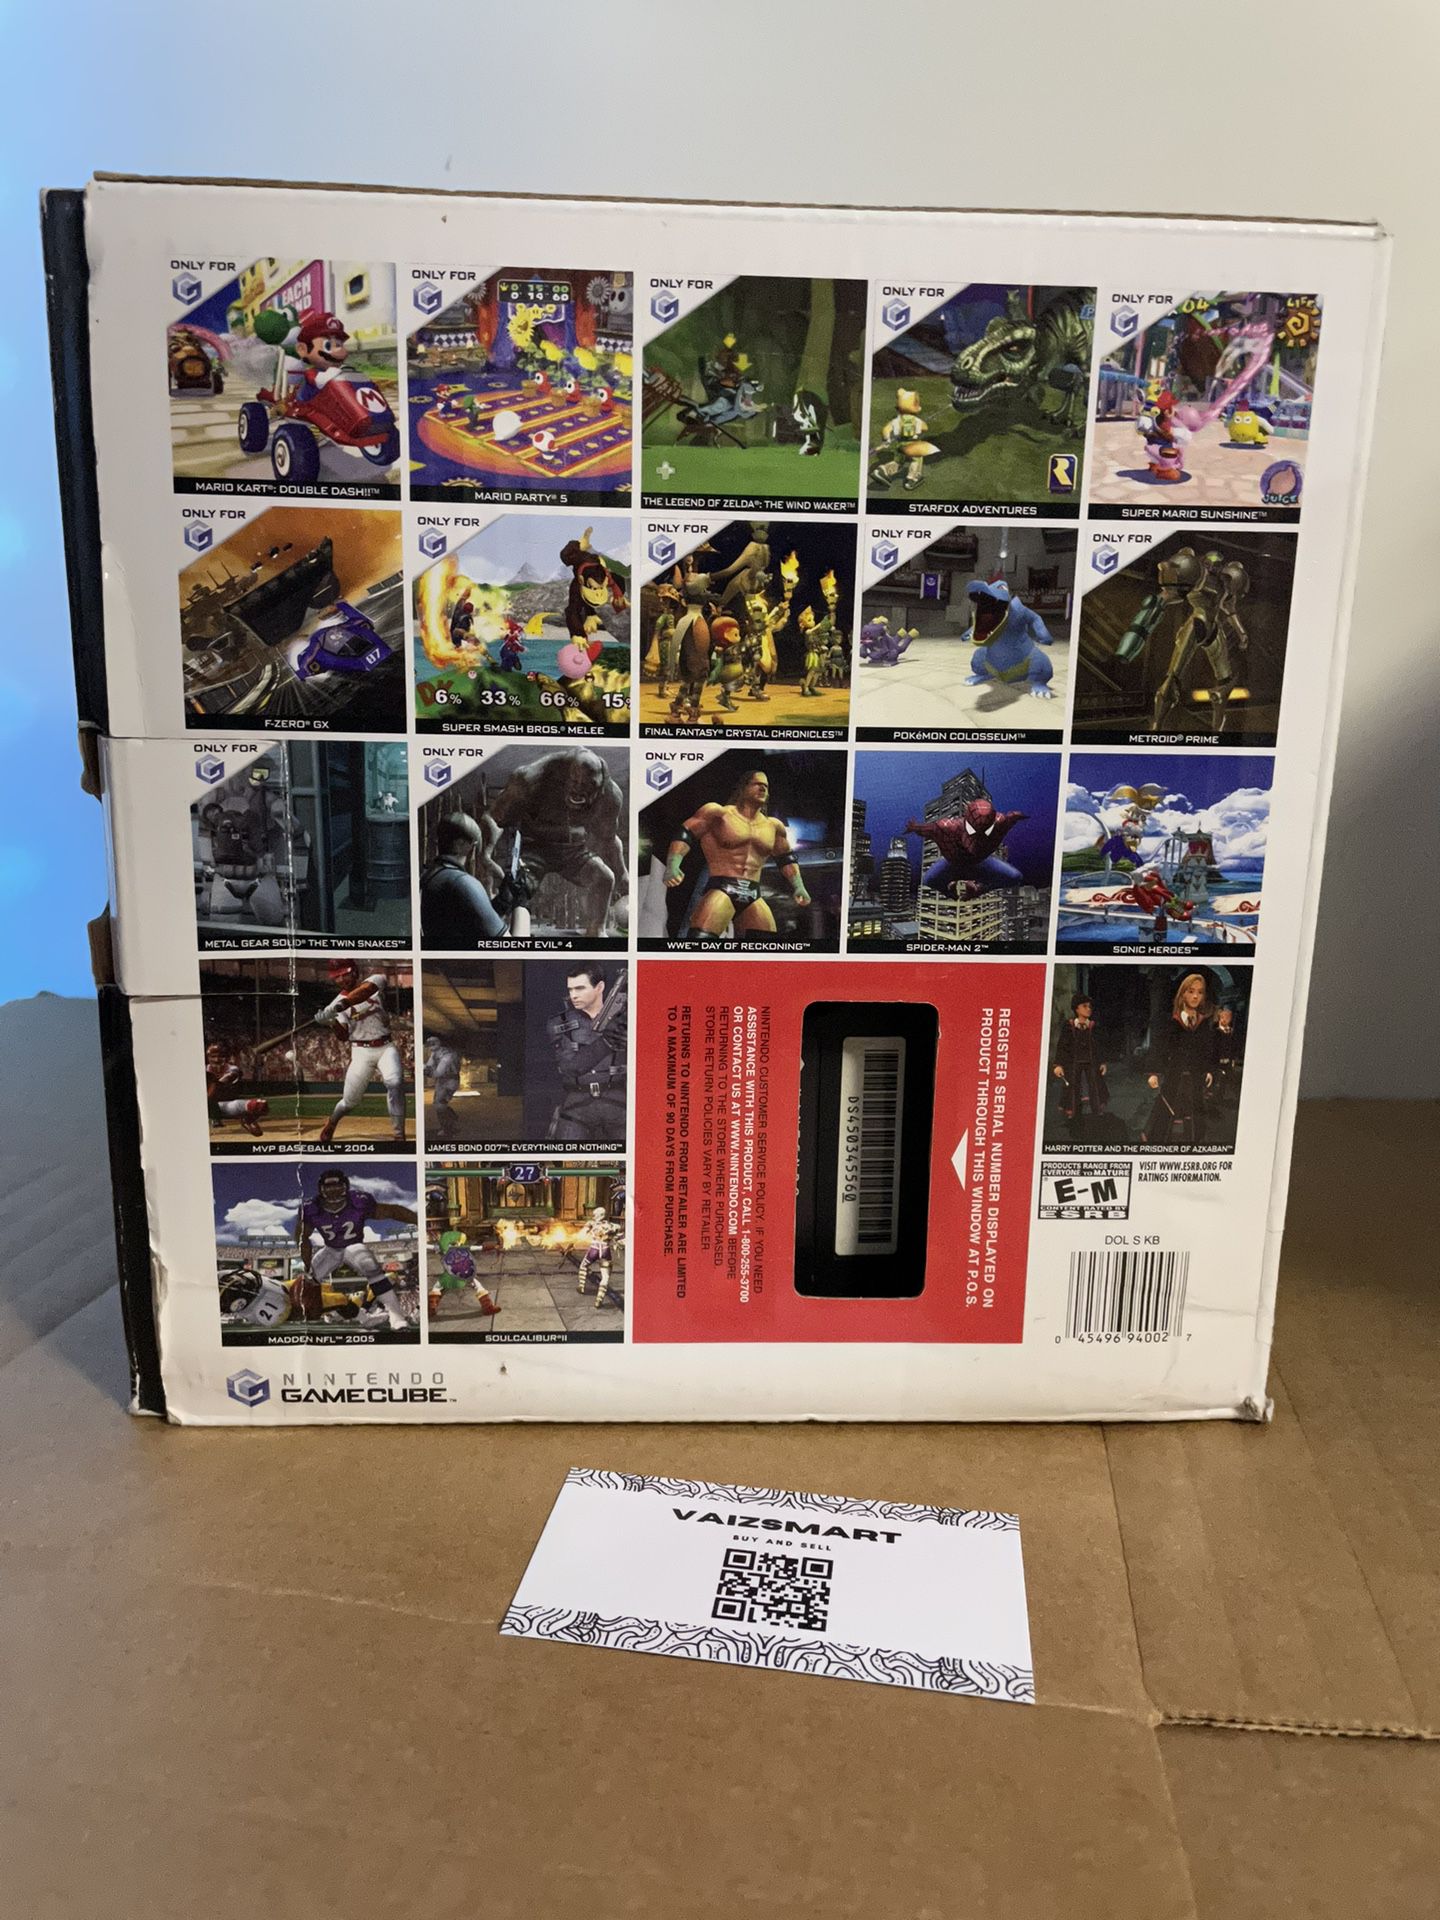 The Legend of Zelda: Ocarina of Time - Master Quest - Nintendo Gamecube for  Sale in Brooklyn, NY - OfferUp